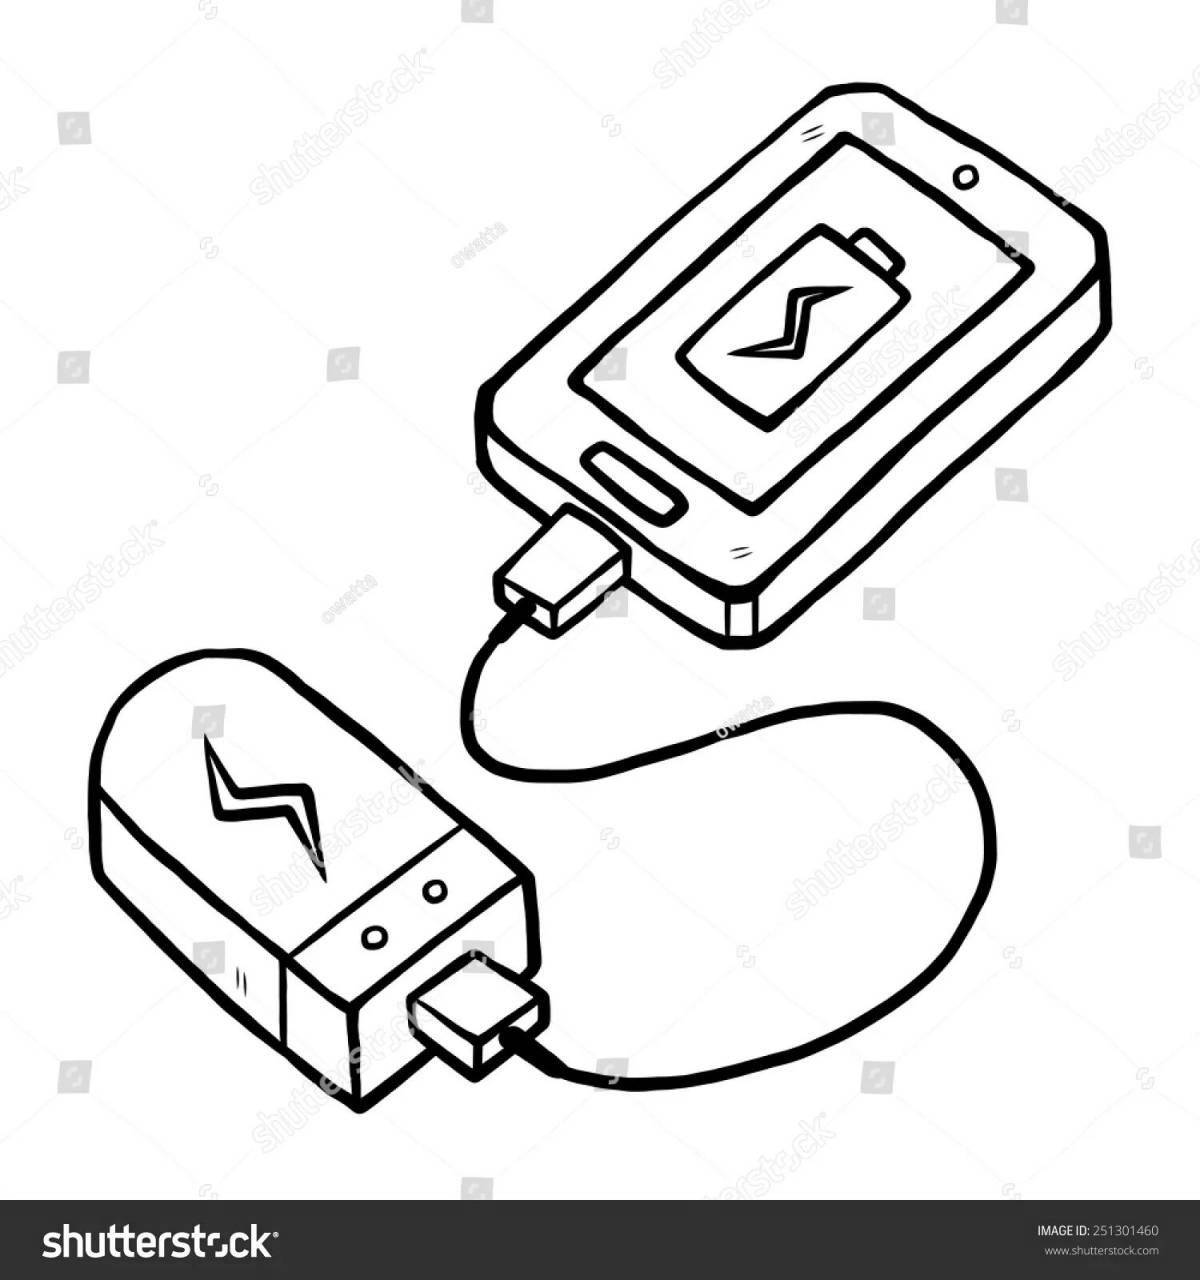 Coloring page vivacious phone charger